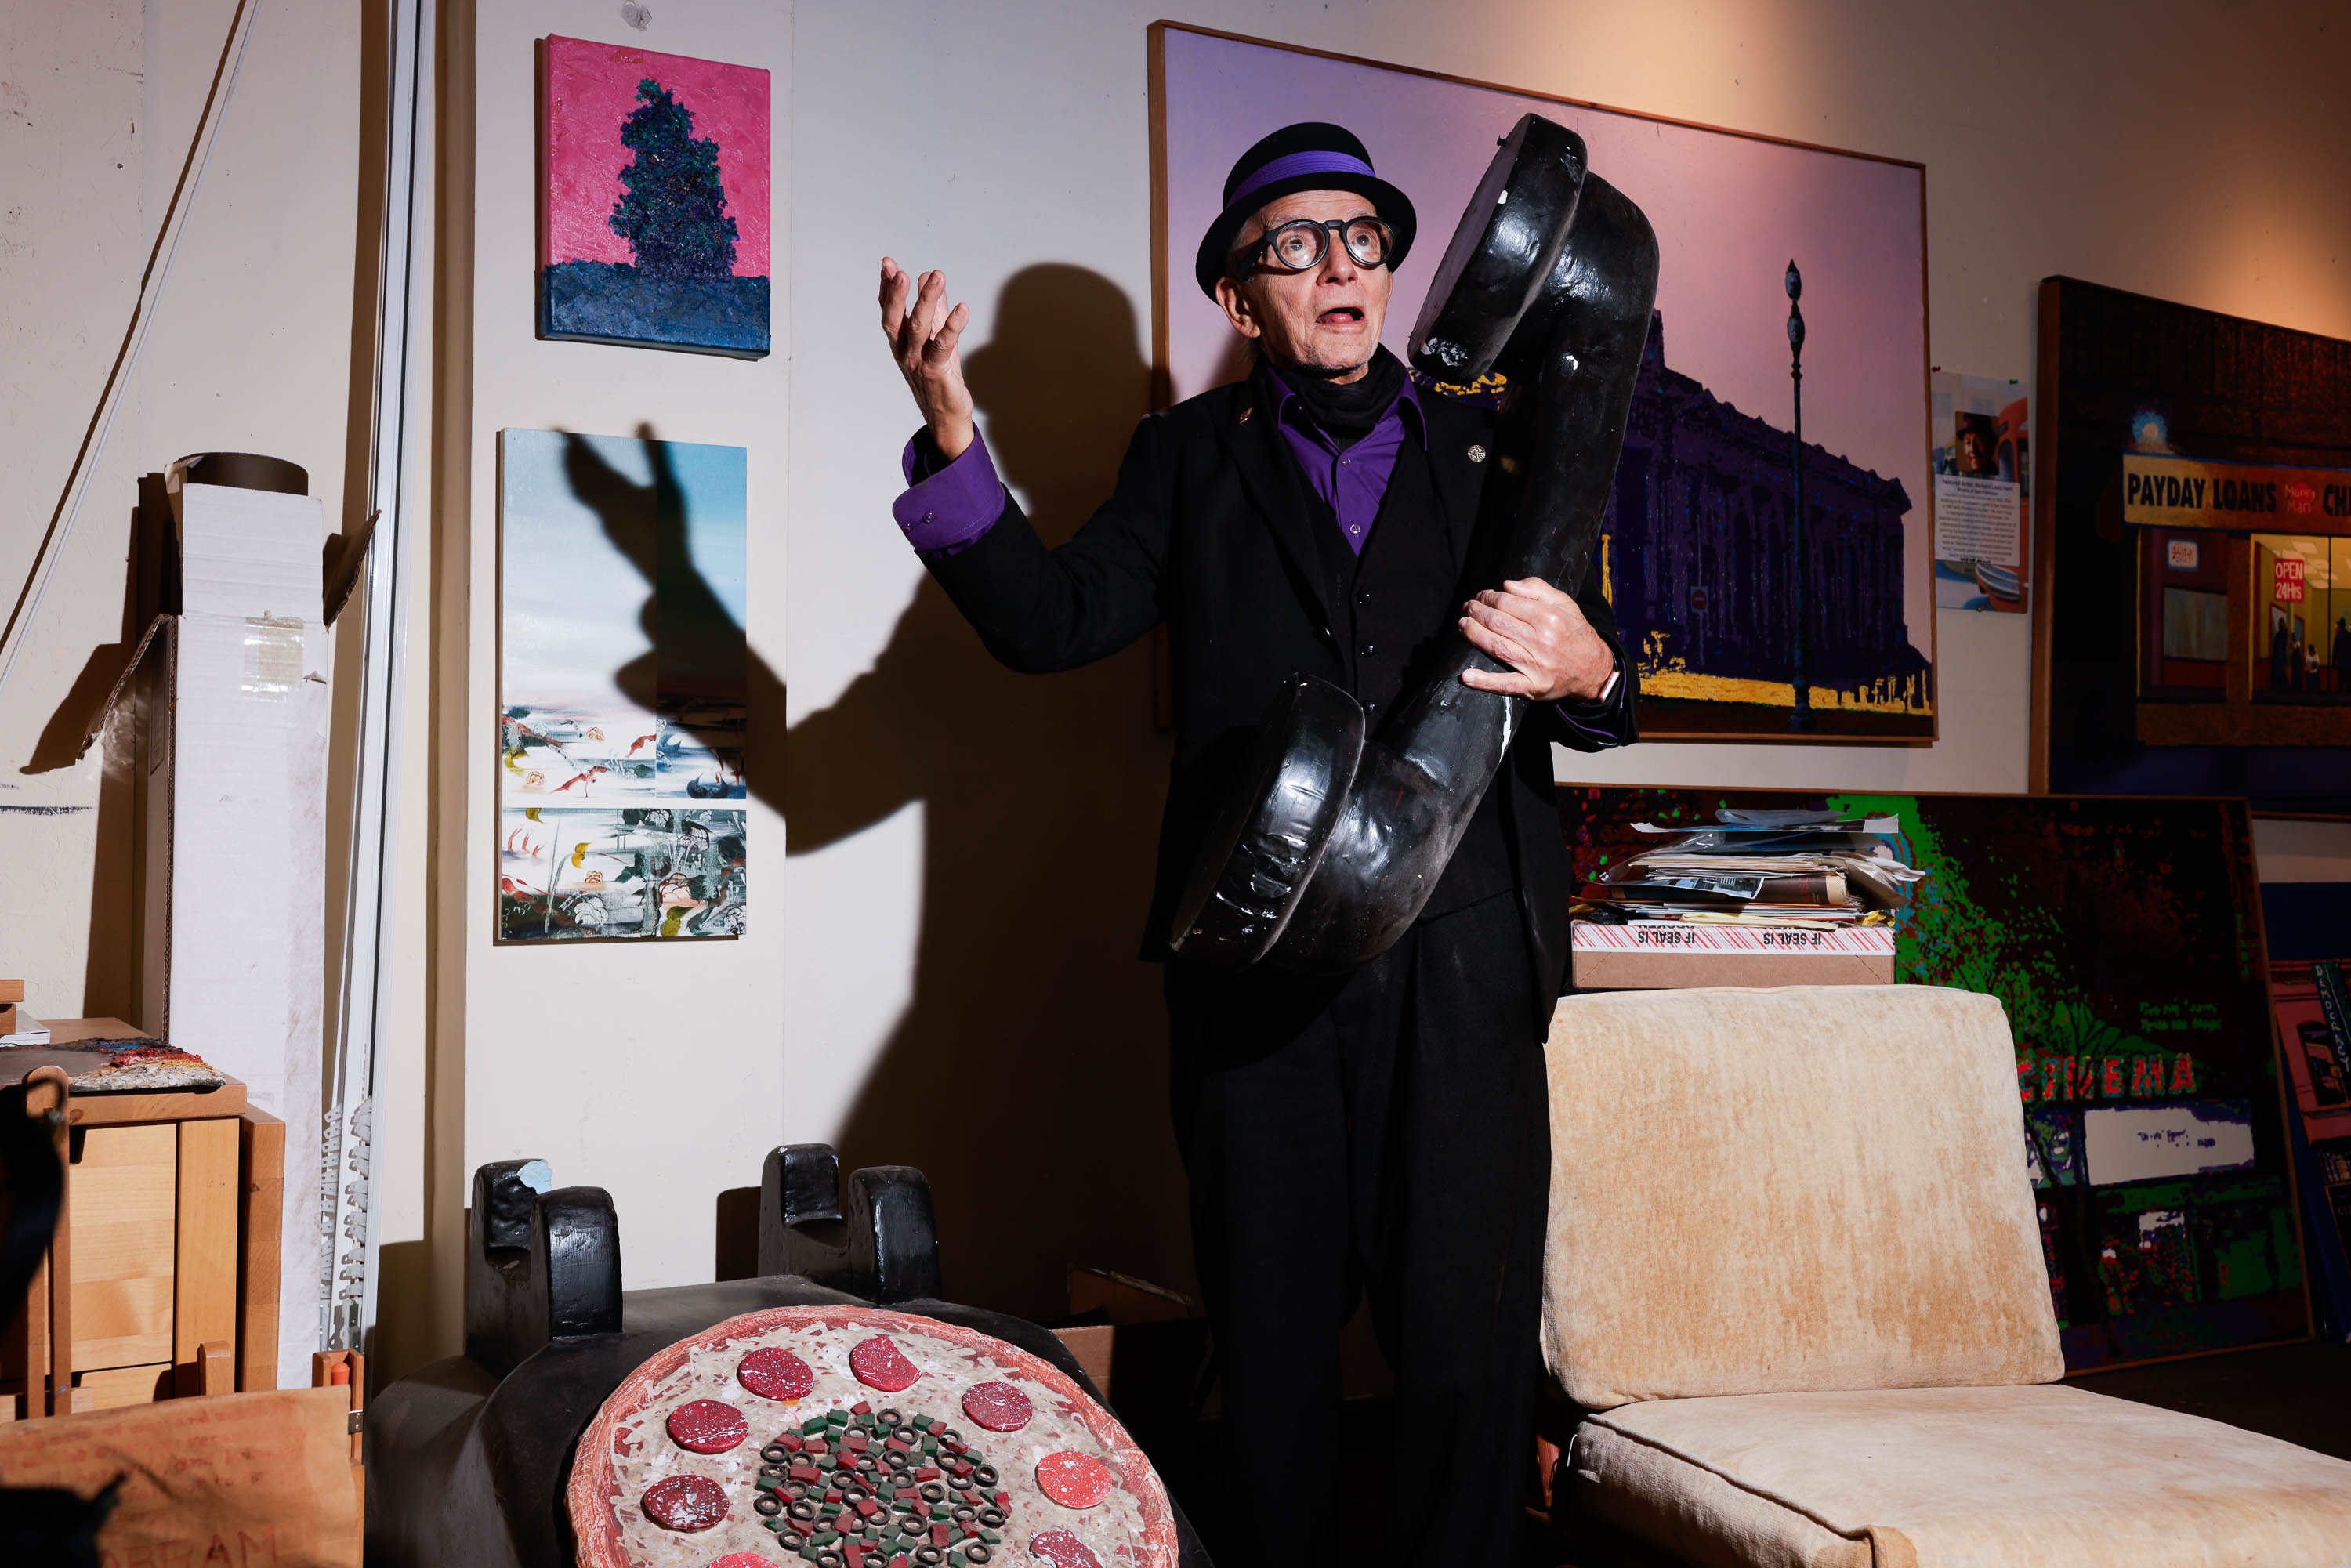 A person in a black suit and hat holds up a large boot, gesturing with other hand, amidst colorful artwork and eclectic decor.